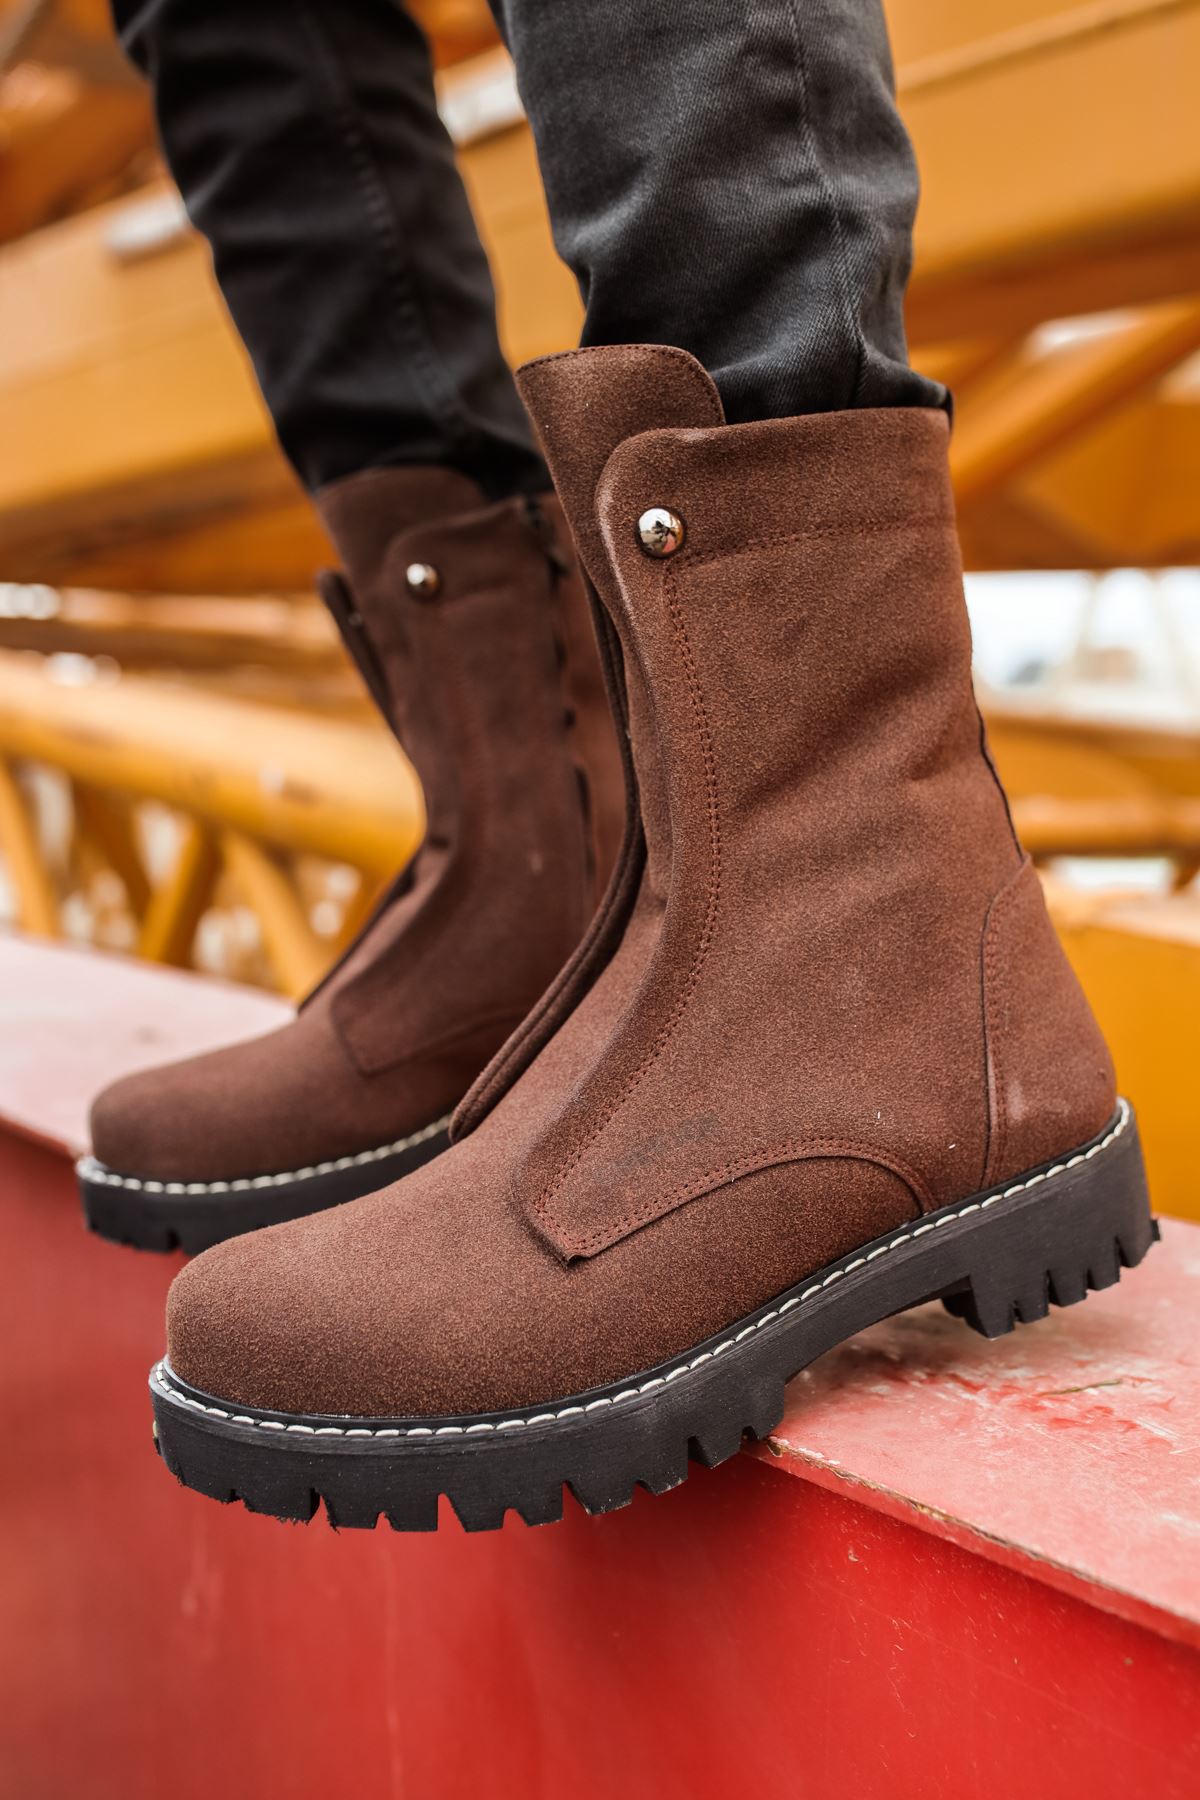 CH027 Men's Suede Brown-Black Sole Casual Winter Boots - STREETMODE™